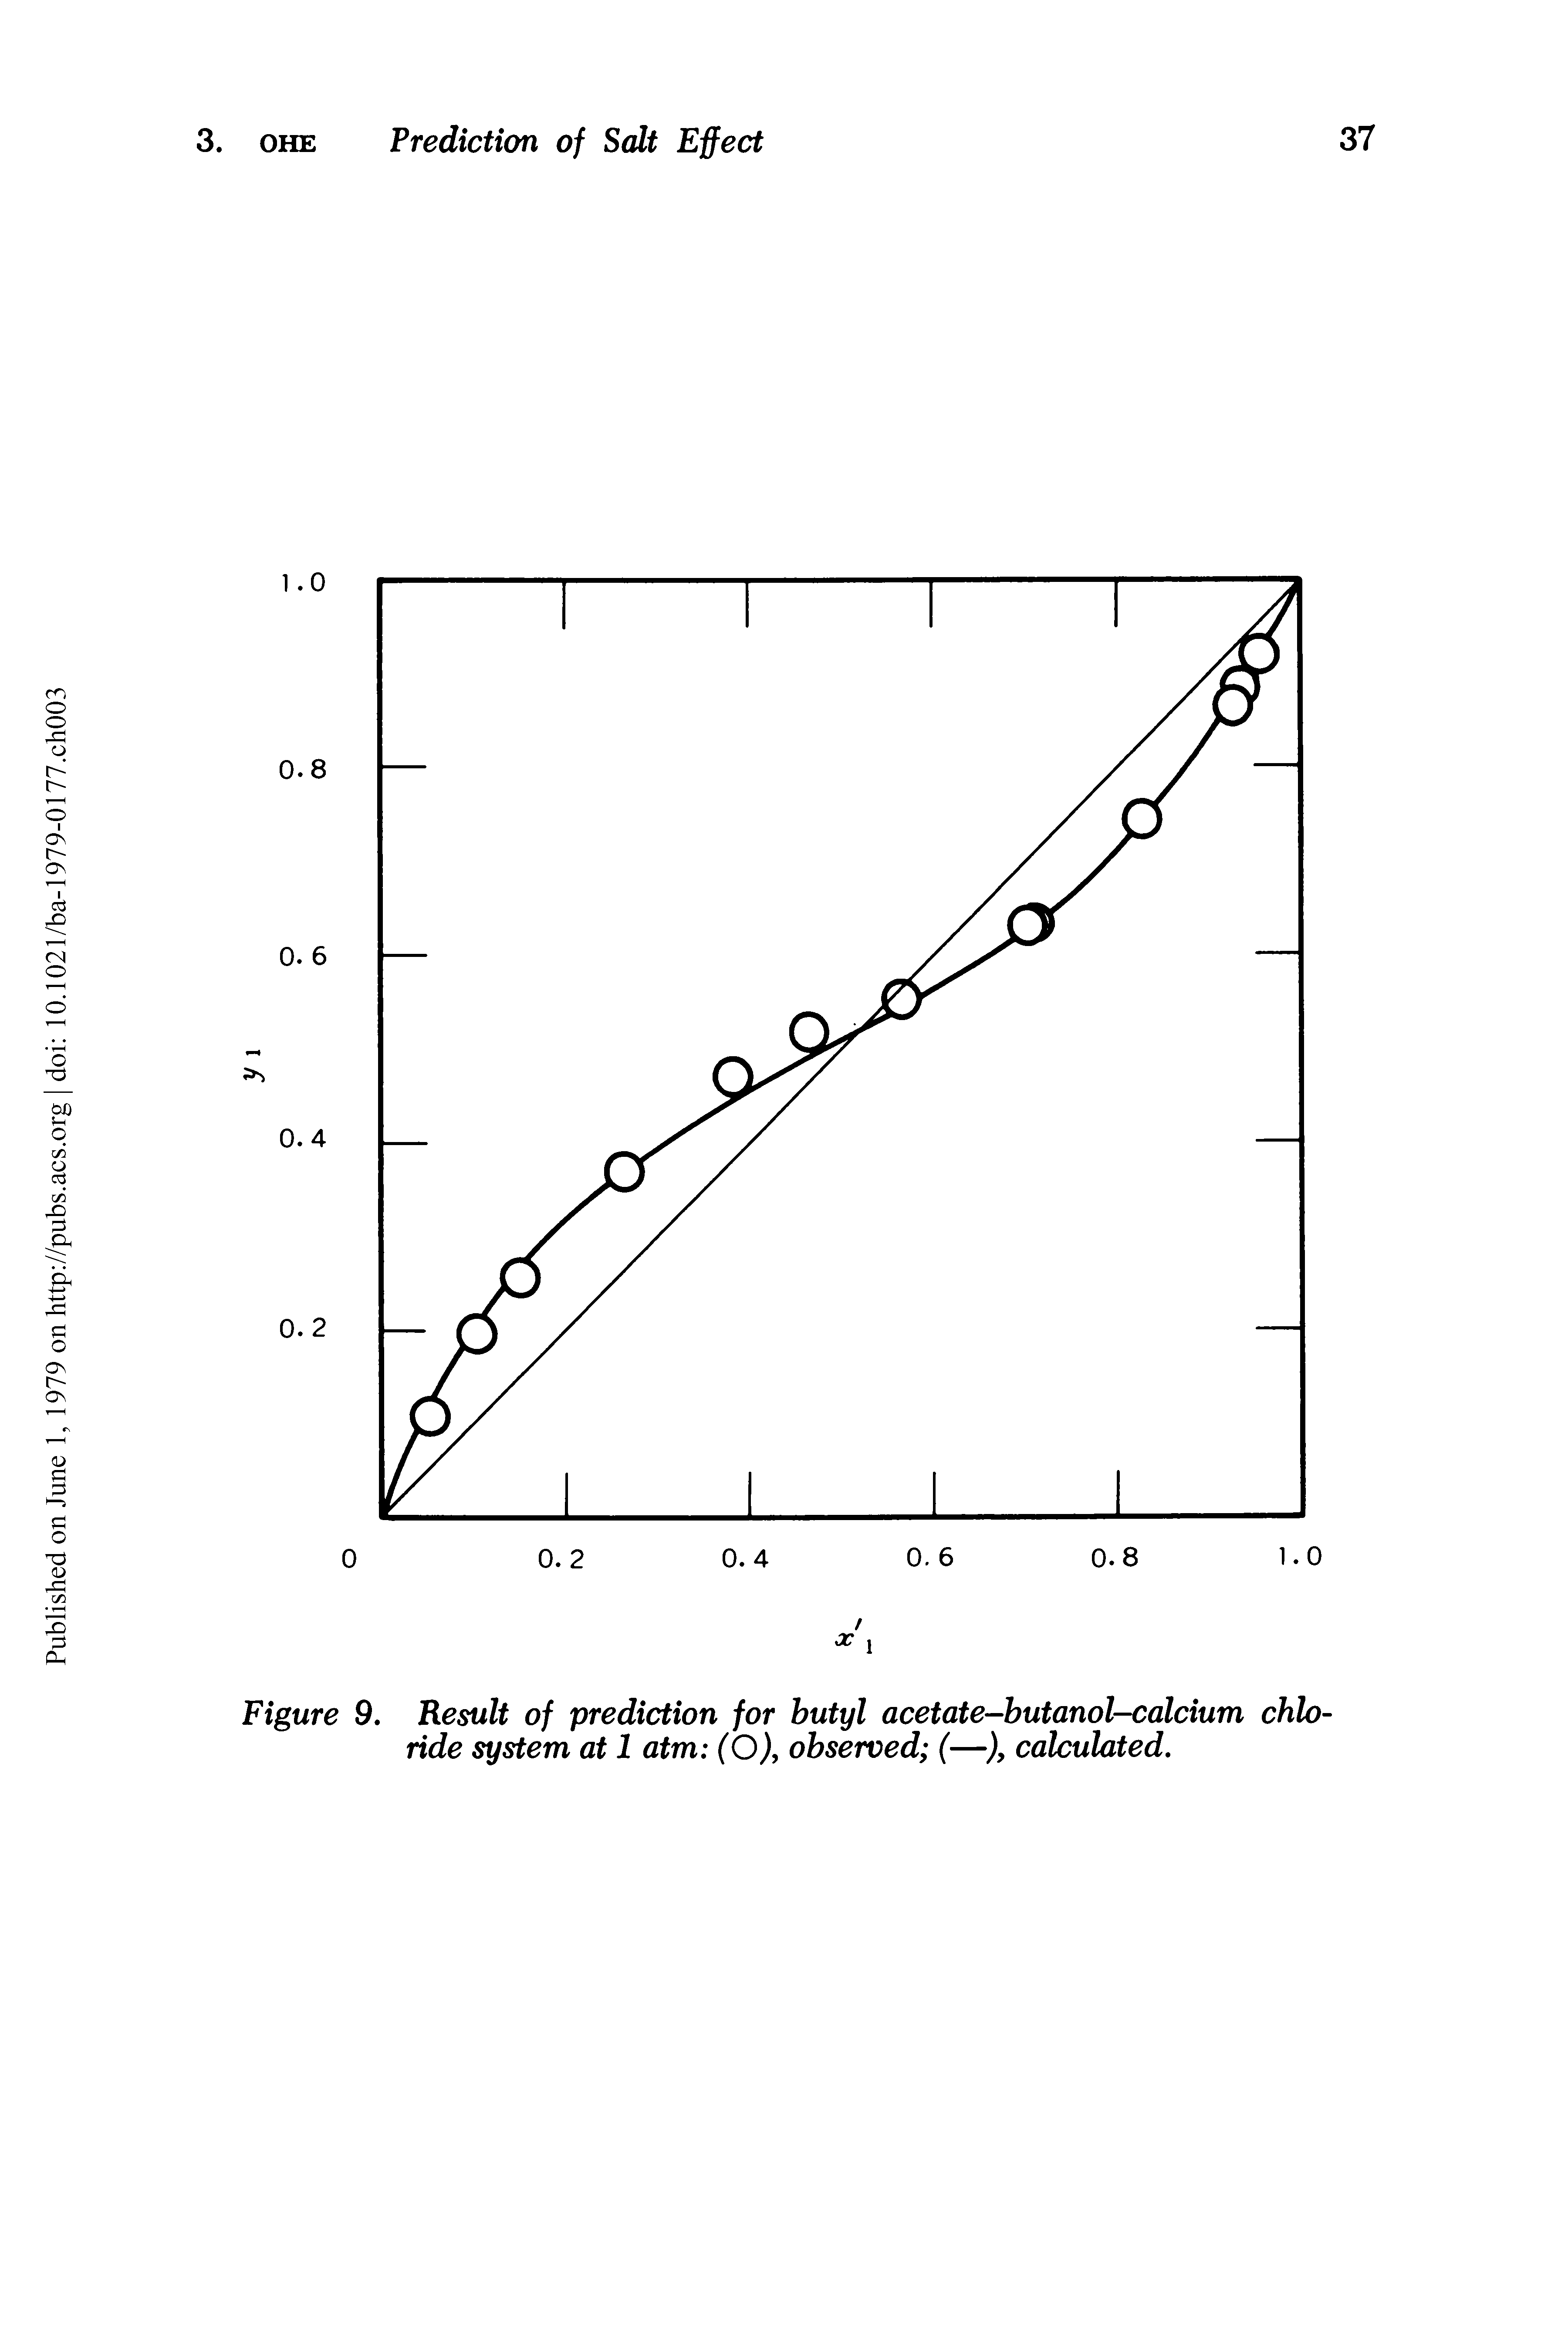 Figure 9. Result of prediction for butyl acetate-butanol-calcium chloride system at 1 atm (O), observed (—), calculated.